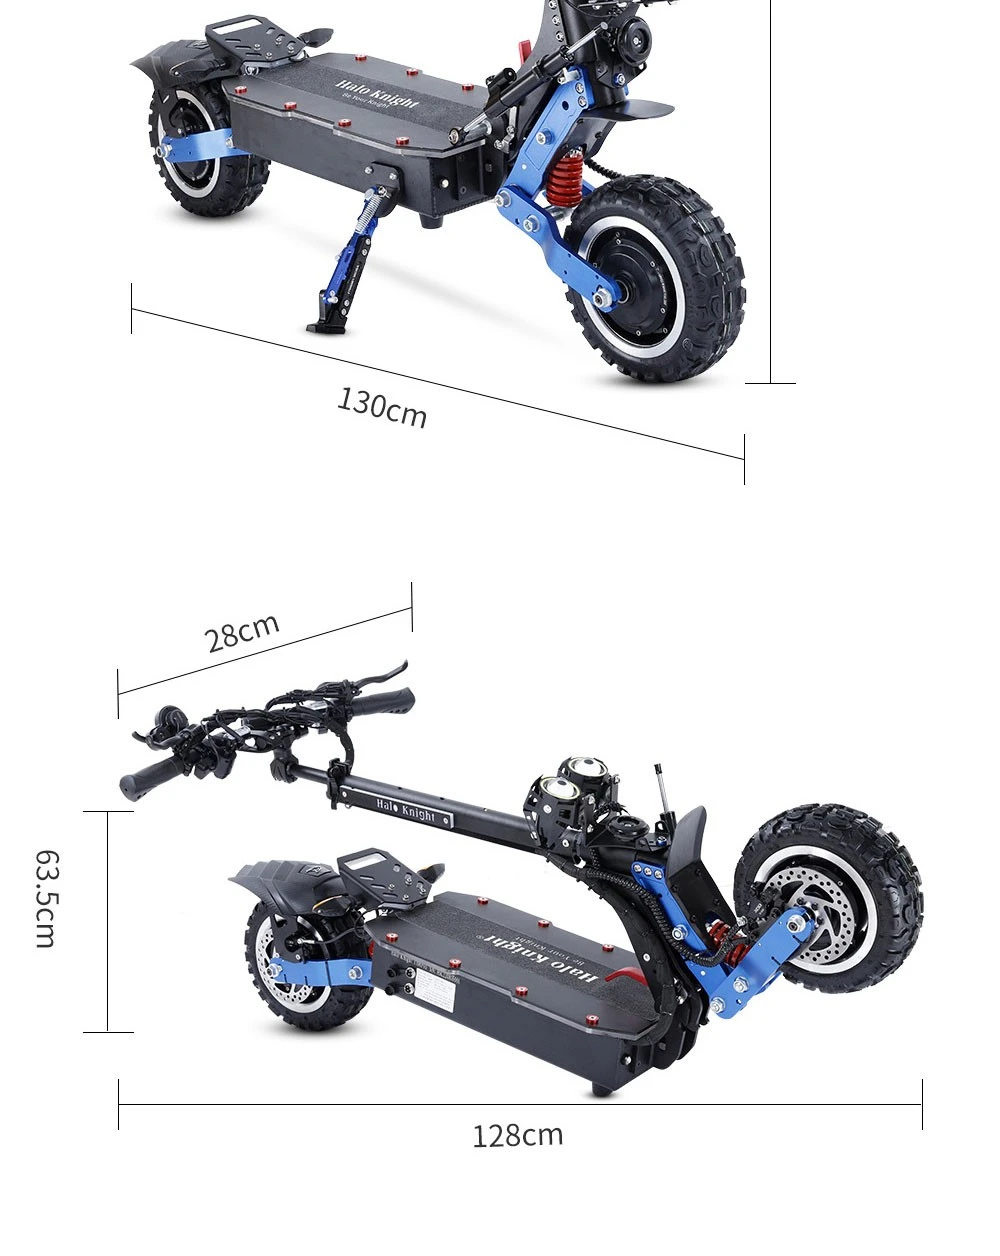 https://img.gkbcdn.com/d/202303/Halo-Knight-T108-Pro-Electric-Scooter-11---Off-road-Tire-519912-17._p1_.jpg